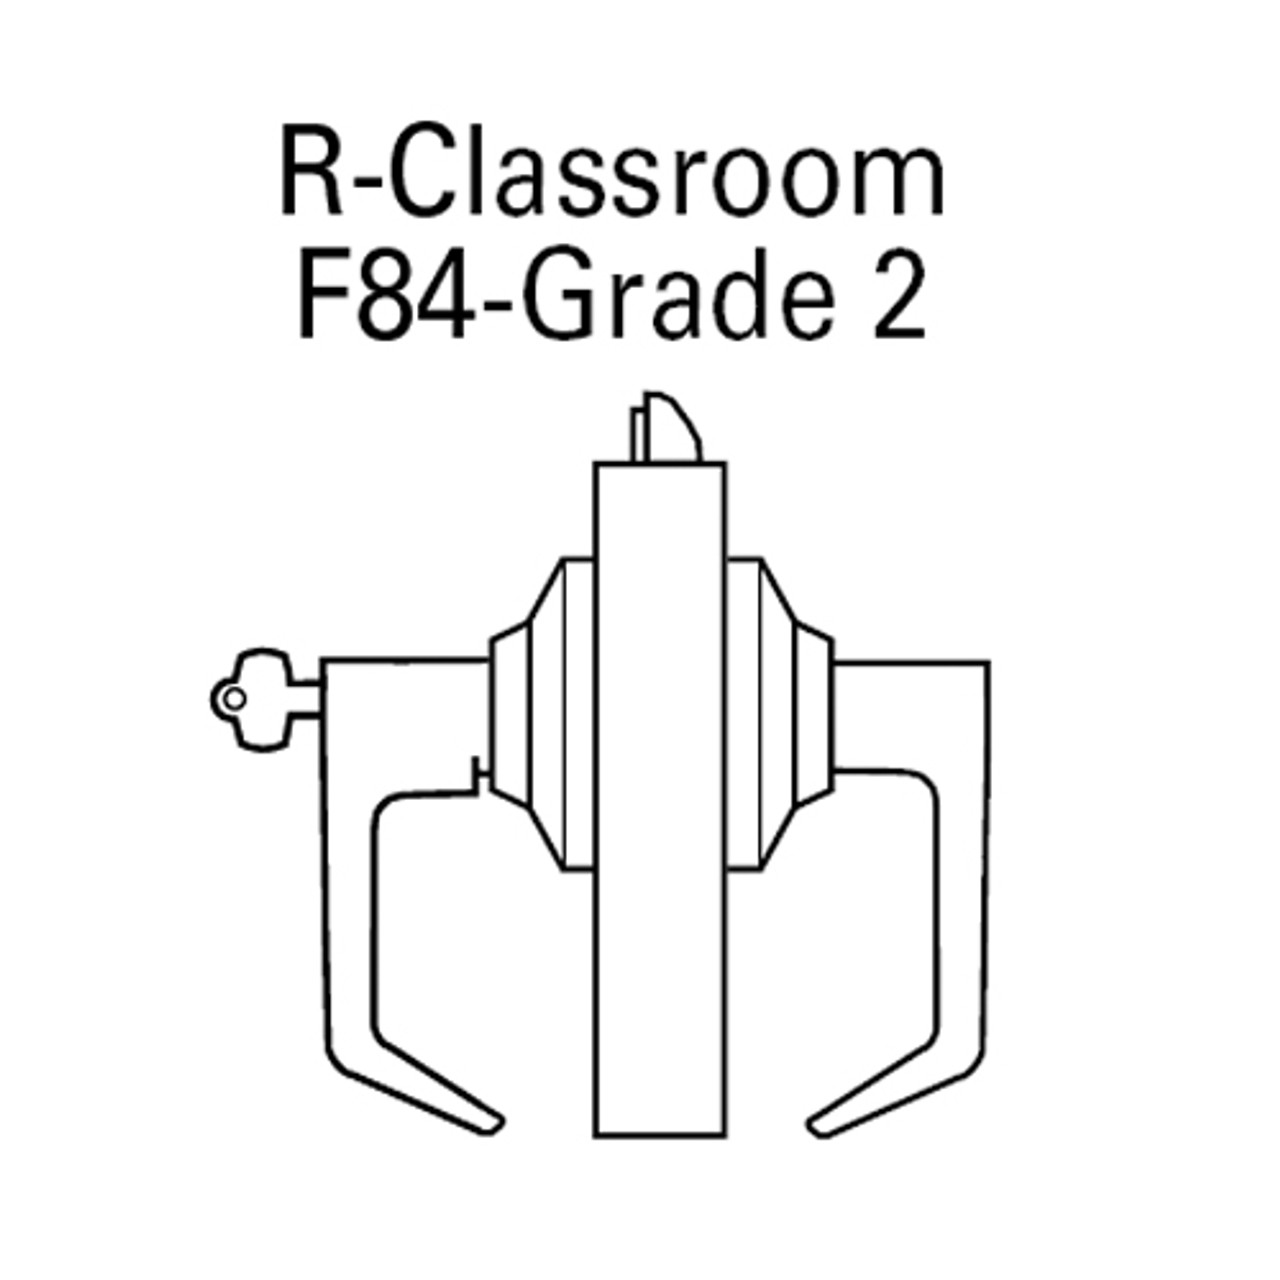 7KC27R16DSTK606 Best 7KC Series Classroom Medium Duty Cylindrical Lever Locks with Curved Without Return Lever Design in Satin Brass